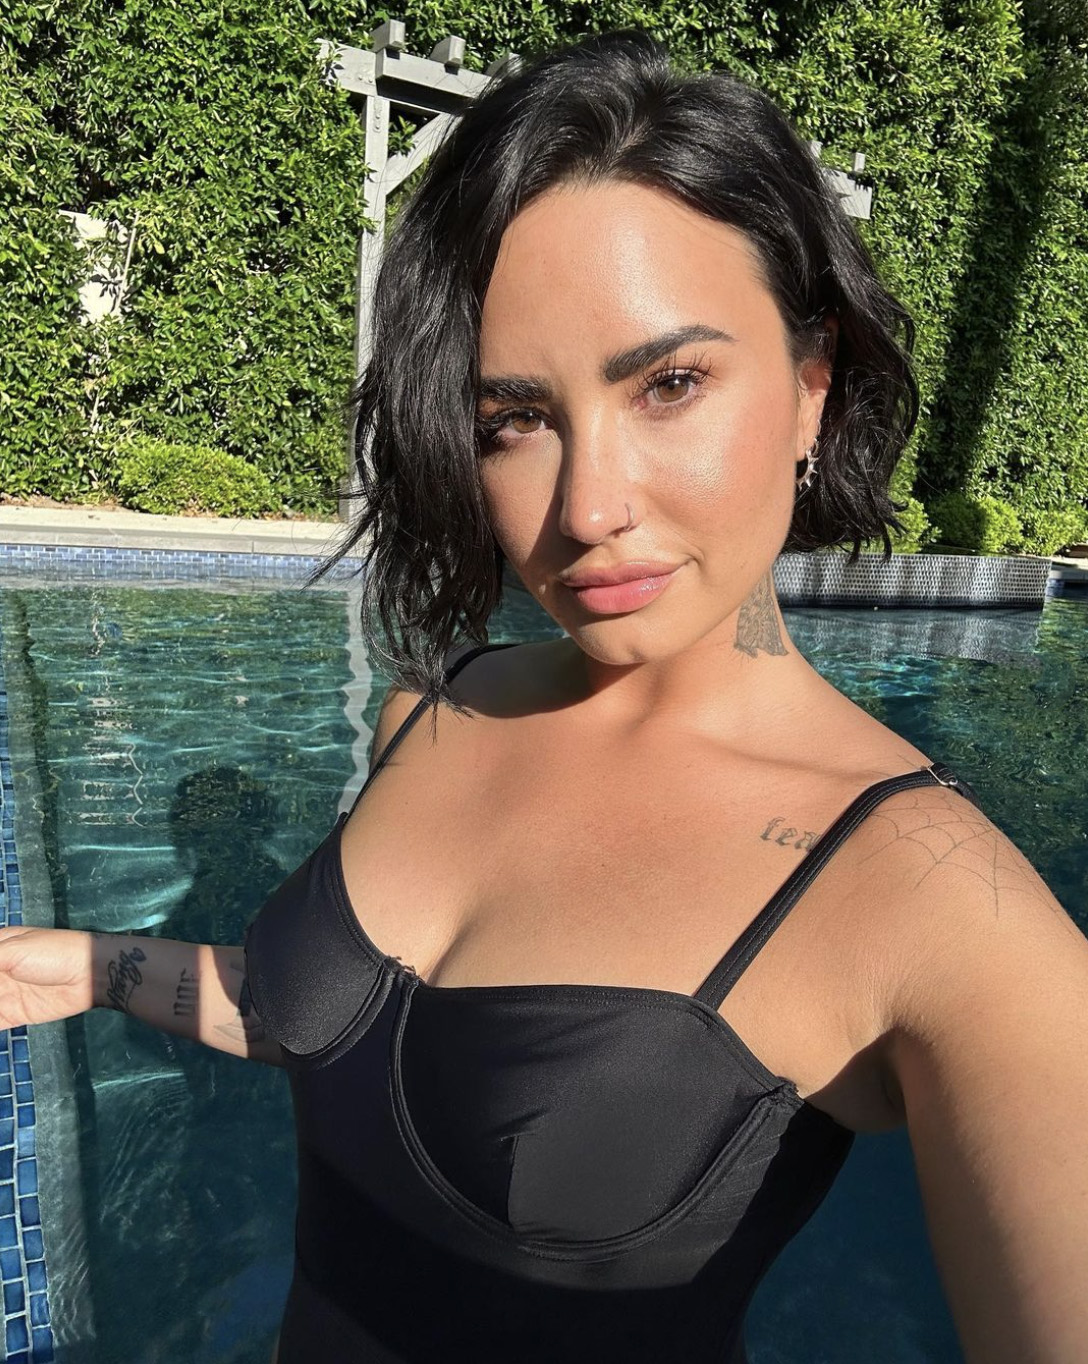 bridget crowder recommends Demi Lovato Hot Naked